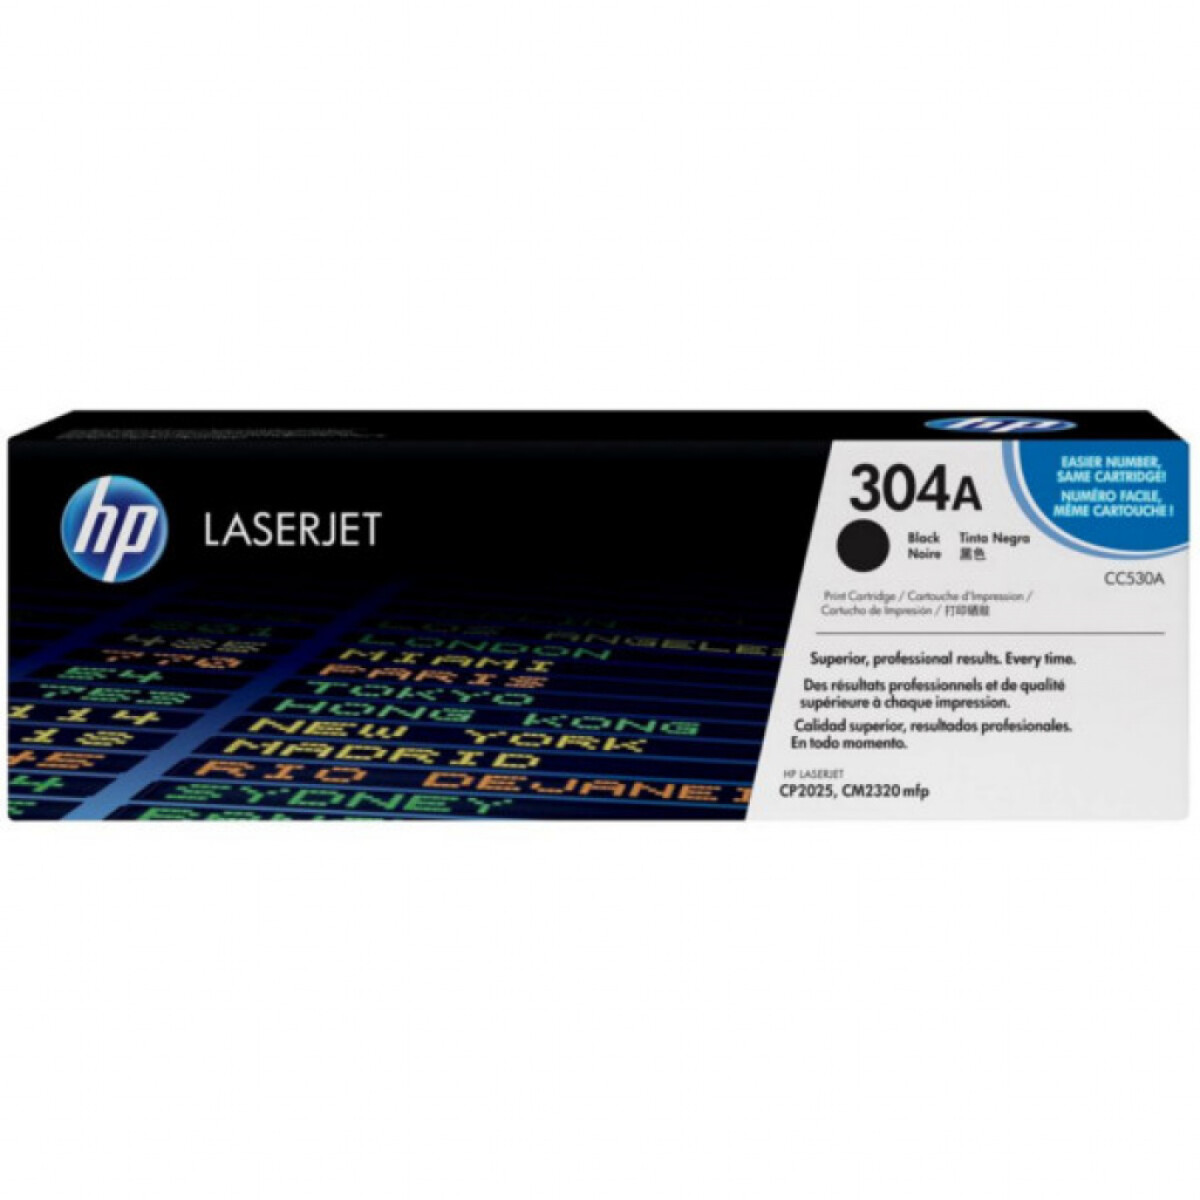 HP TONER CC530A 304A NEGRO 2020/2025/2320 DN 3500 CPS - Hp Toner Cc530a 304a Negro 2020/2025/2320 Dn 3500 Cps 